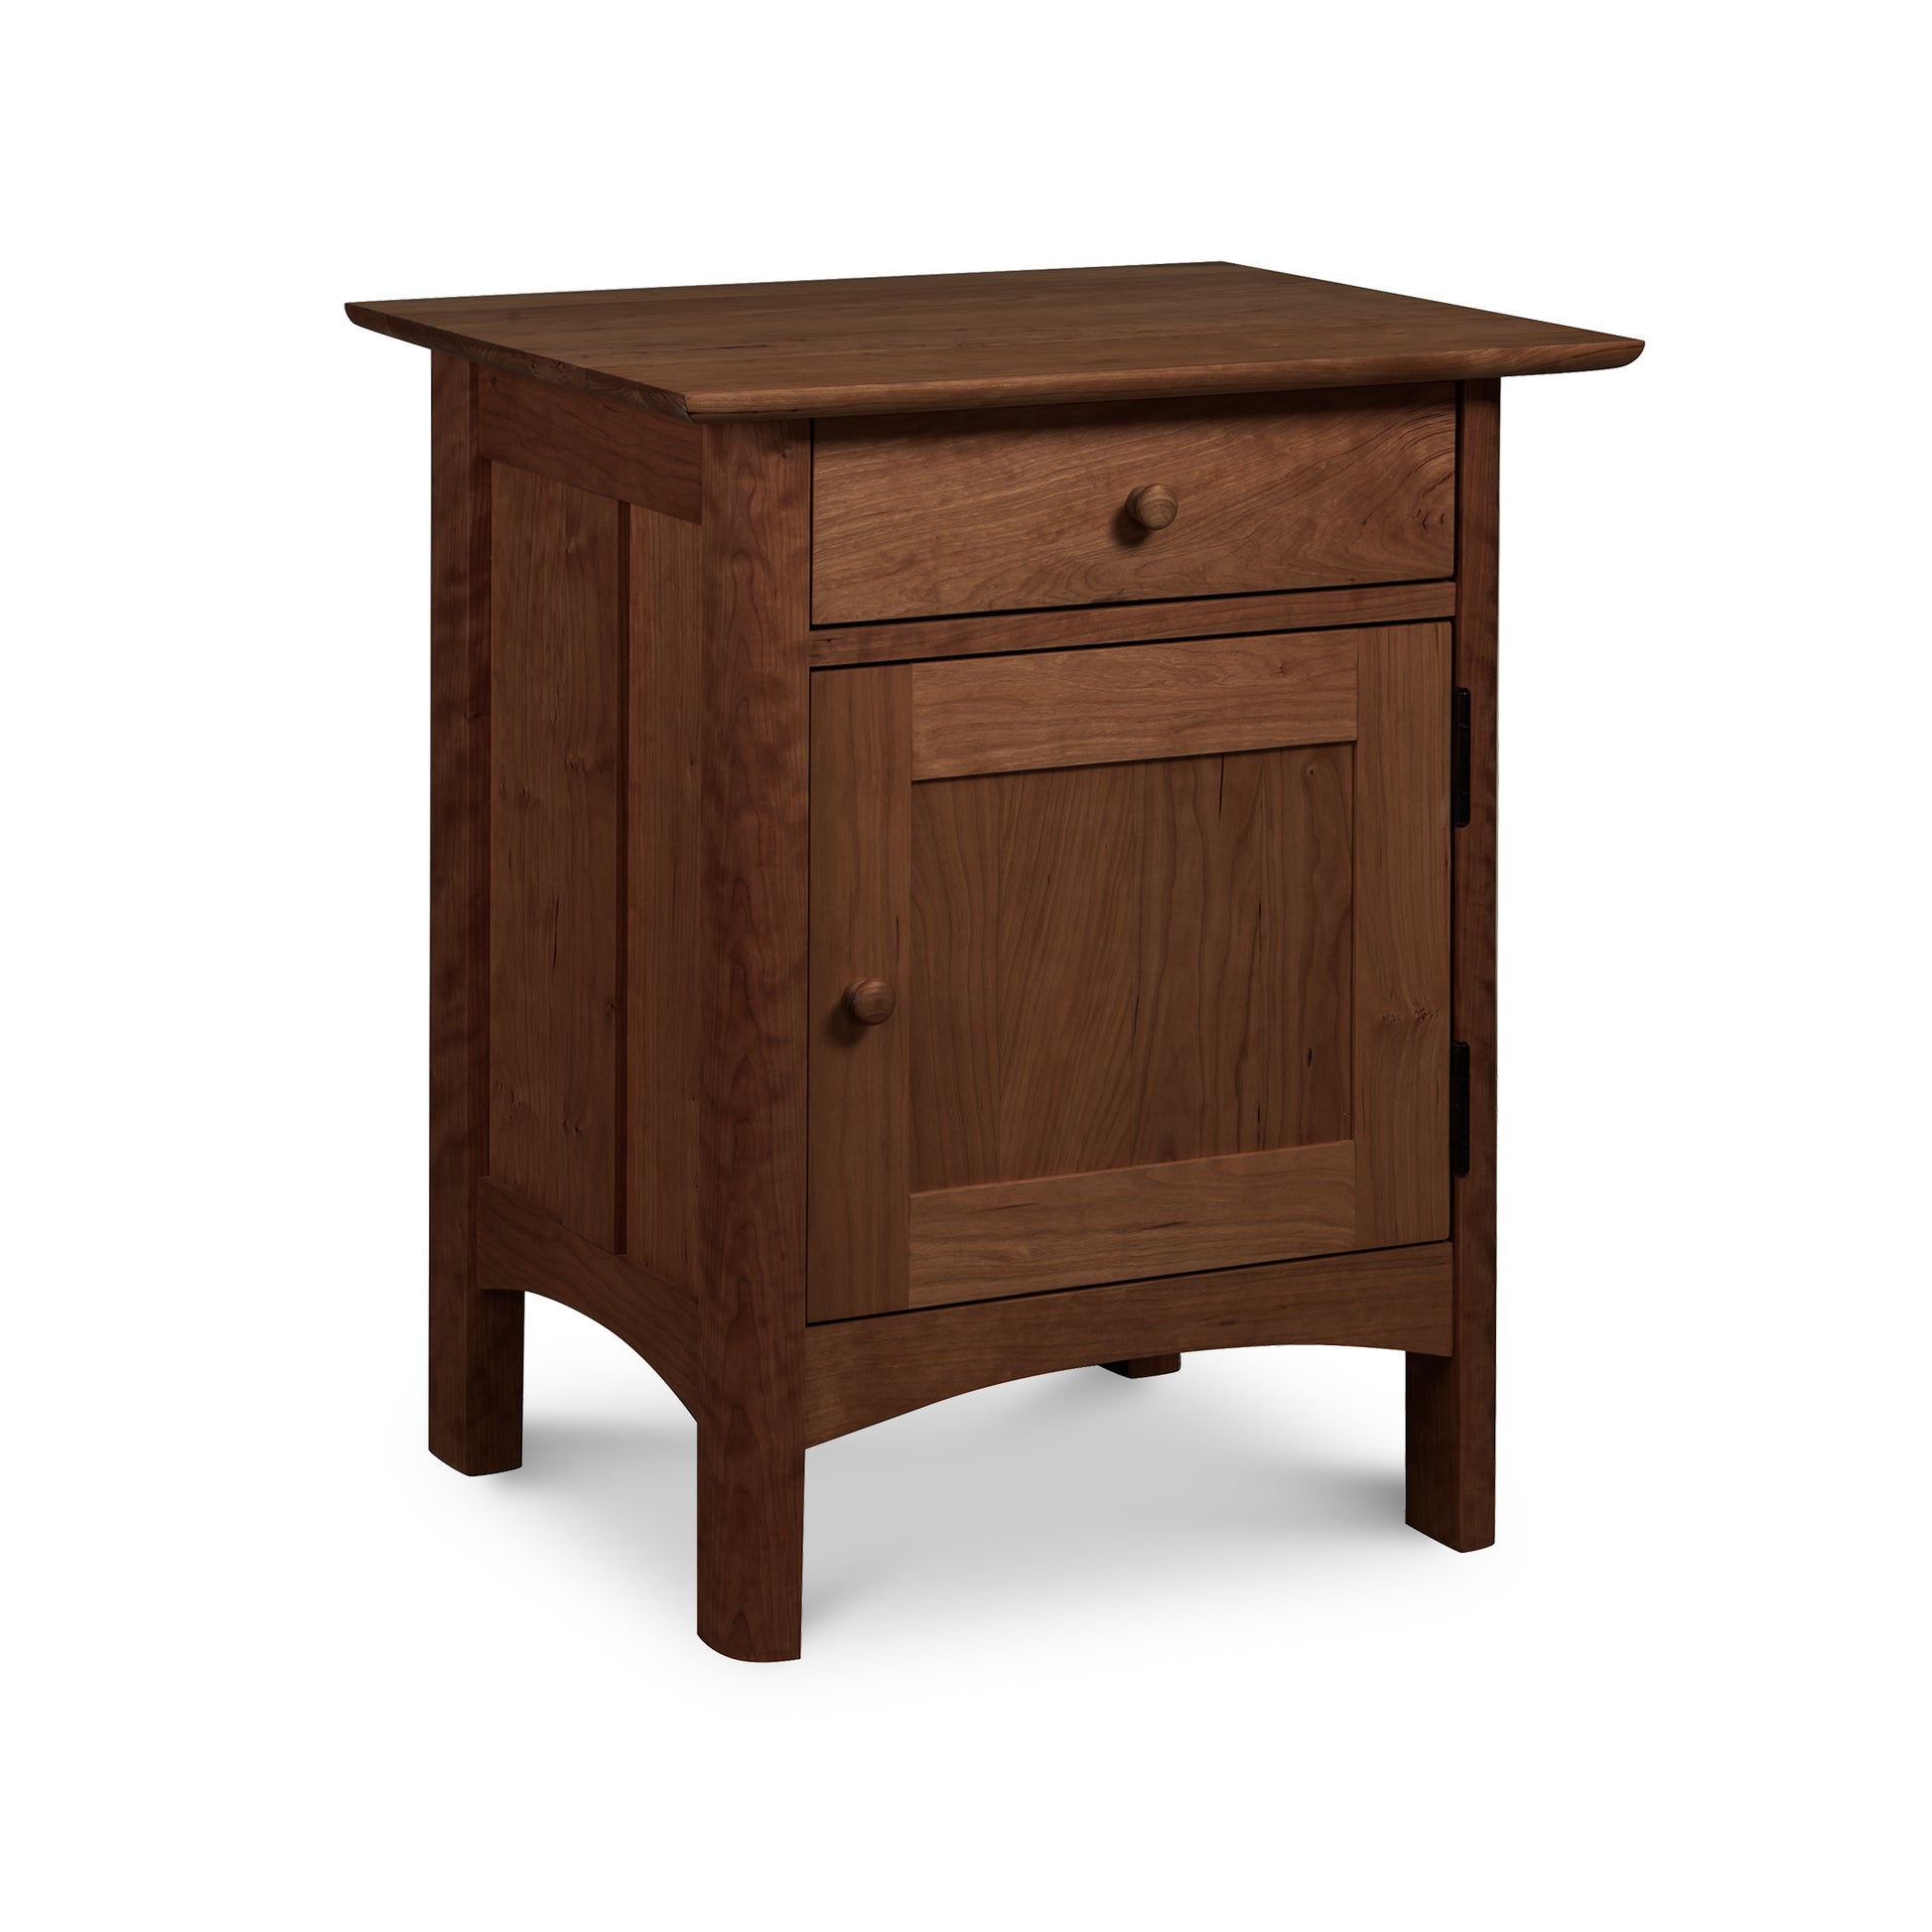 Heartwood Shaker 1-Drawer Nightstand with Door, eco-friendly oil finish, solid wood with a single drawer and cabinet door against a white background. Designed by Vermont Furniture Designs.